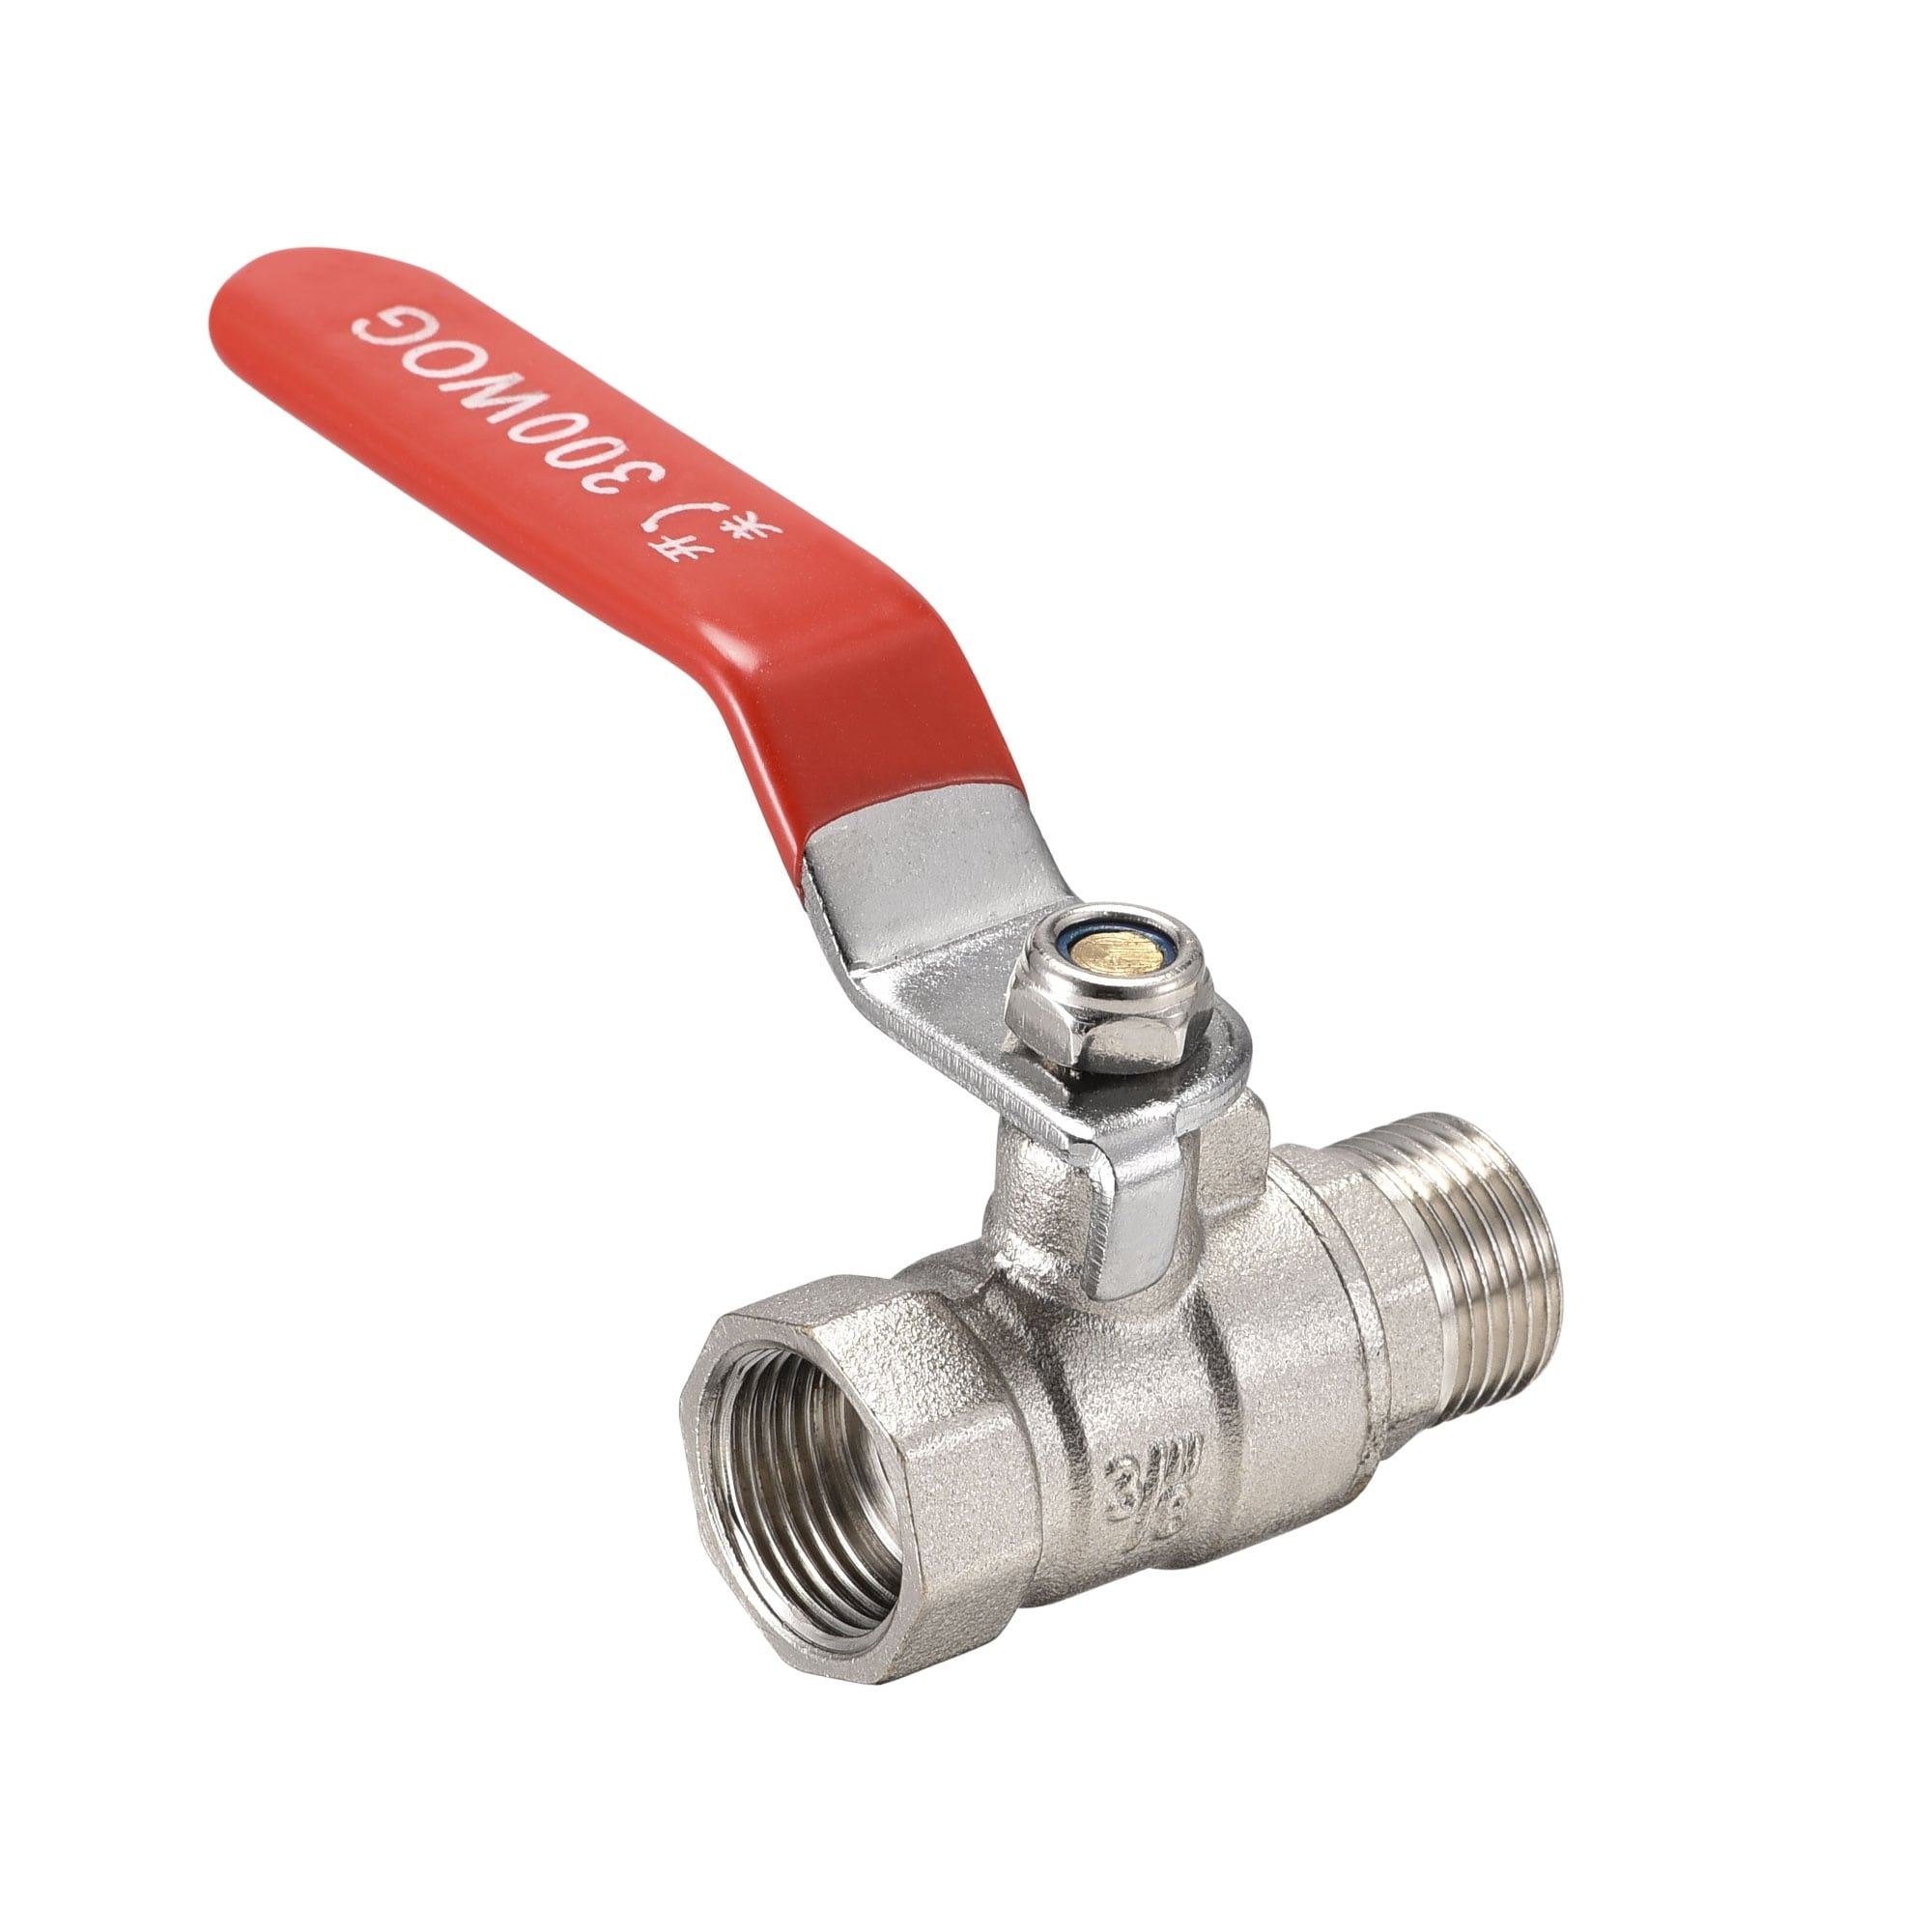 15mm Lever Ball Valve Red Handle Brass Compression Fitting Stop Shut-off PN30